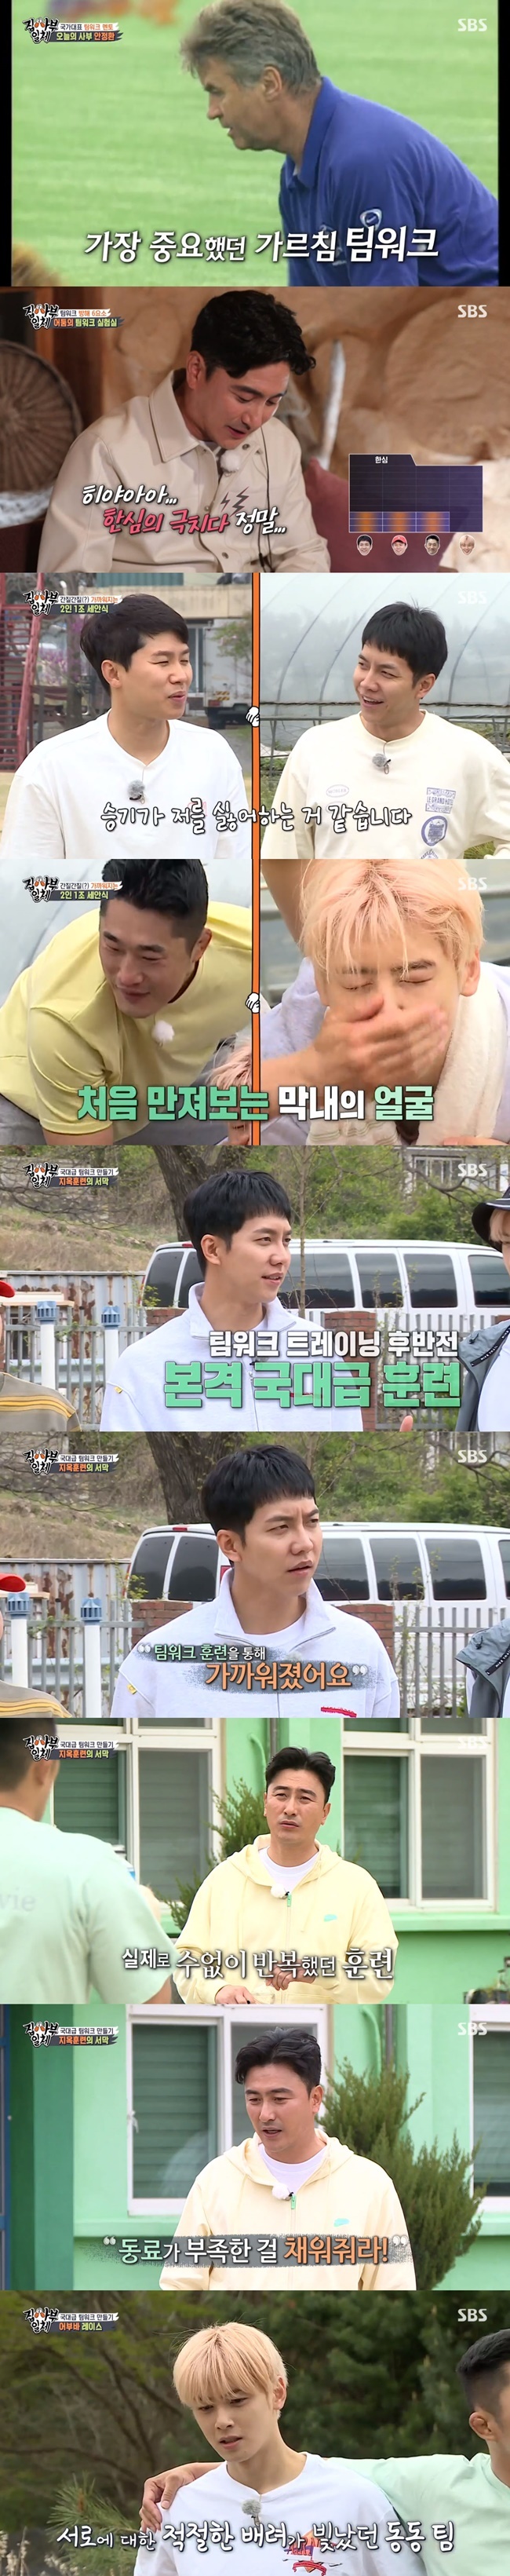 Ahn Jung-hwan stressed the importance of teamwork training.On May 9, SBS All The Butlers, former national soccer player Ahn Jung-hwan appeared as master.On this day, Ahn Jung-hwan said, All The Butlers members are good teamwork, but I really need to see it once.I am a sportsman, so it is a specialty to make my body tired. The first experiment prepared by Ahn Jung-hwan was a dark war room.Well see if we get a colleague when the fear comes or were in a corner, said Ahn Jung-hwan.Members who visited the laboratory decided on the order of entry through the Scissors, Rocks and Paper.Ahn Jung-hwan, who saw Cha Eun-woo at the front, said, No matter how much Scissors, Rocks, and Paper are, it is a bit of a thing to set up the youngest.Even members shut the door after putting Cha Eun-woo in the dark room, with Ahn Jung-hwan sighing, The extreme of pathetic.The members of the laboratory found a box containing a gift prepared by the master. The members delayed responsibility to each other and refused to check the box.Lee Seung-gi, among them, reached out and got earthworm jelly. Lee Seung-gi doubted Kim Dong-Hyun, saying, Did you have a type of martial arts?I thought All The Butlers teamwork was good, but it was not at all, said Ahn Jung-hwan, who appeared. It was an experiment I wanted to see with my colleagues and help me when I was in the middle of the game.In addition, Ahn Jung-hwan released a teamwork report of each member he evaluated and said, Donghyun has nothing to see.The next day, Ahn Jung-hwan announced to the members that they would be trained in high-intensity teamwork. Before the full-scale training, the members were given a mission to wash each other.The mates named by Ahn Jung-hwan were Yang Se-hyeong - Lee Seung-gi, Cha Eun-woo - Kim Dong-Hyun.Yang Se-hyeong, who received the wash of Lee Seung-gi, said something is wobbly; Lee Seung-gi sympathized that I felt a subtle sympathy.The first of Ahn Jung-hwans hell training was a two-man, one-eared dribble.Lee Seung-gi and Yang Se-hyeong were tit-for-tat at the same time as they started and showed signs of division.Ahn Jung-hwan then ordered his disciples to close their eyes and open their eyes if they wanted to change their team members.Lee Seung-gi and Yang Se-hyeong then met eyes at the same time and laughed at the embarrassment.The members listened to the two-person group in turn, dribbled, hugged and ran, and so on. When Ahn Jung-hwan saw it, This was so hard for the player.I wanted to die after 10 times. I wanted to coach Hiddink every time I did this. I put on a person who was not able to stick to the same position or a person who was short, a tall person - a small person.I overcame the disadvantage and filled my colleagues shortages, knowing each others hearts and caring. The next training was a fishboo bar run; members must ride the course with a mate to reach their destination, although, in the middle, the player can be replaced.Yang Se-hyeong encouraged Lee Seung-gi, who carried himself up, to be strong because you have it; you dont have to answer it.Lee Seung-gi, who had lost his physical strength, reached the turnaround with a refusal to take shifts and said, I had done this training when I was in the army.I have to go this distance alone. Lee Seung-gi thanked Yang Se-hyeong for praising him for his extension.However, Yang Se-hyeong said, If Seung-gi originally praises me, I like it. I have to do it cool.